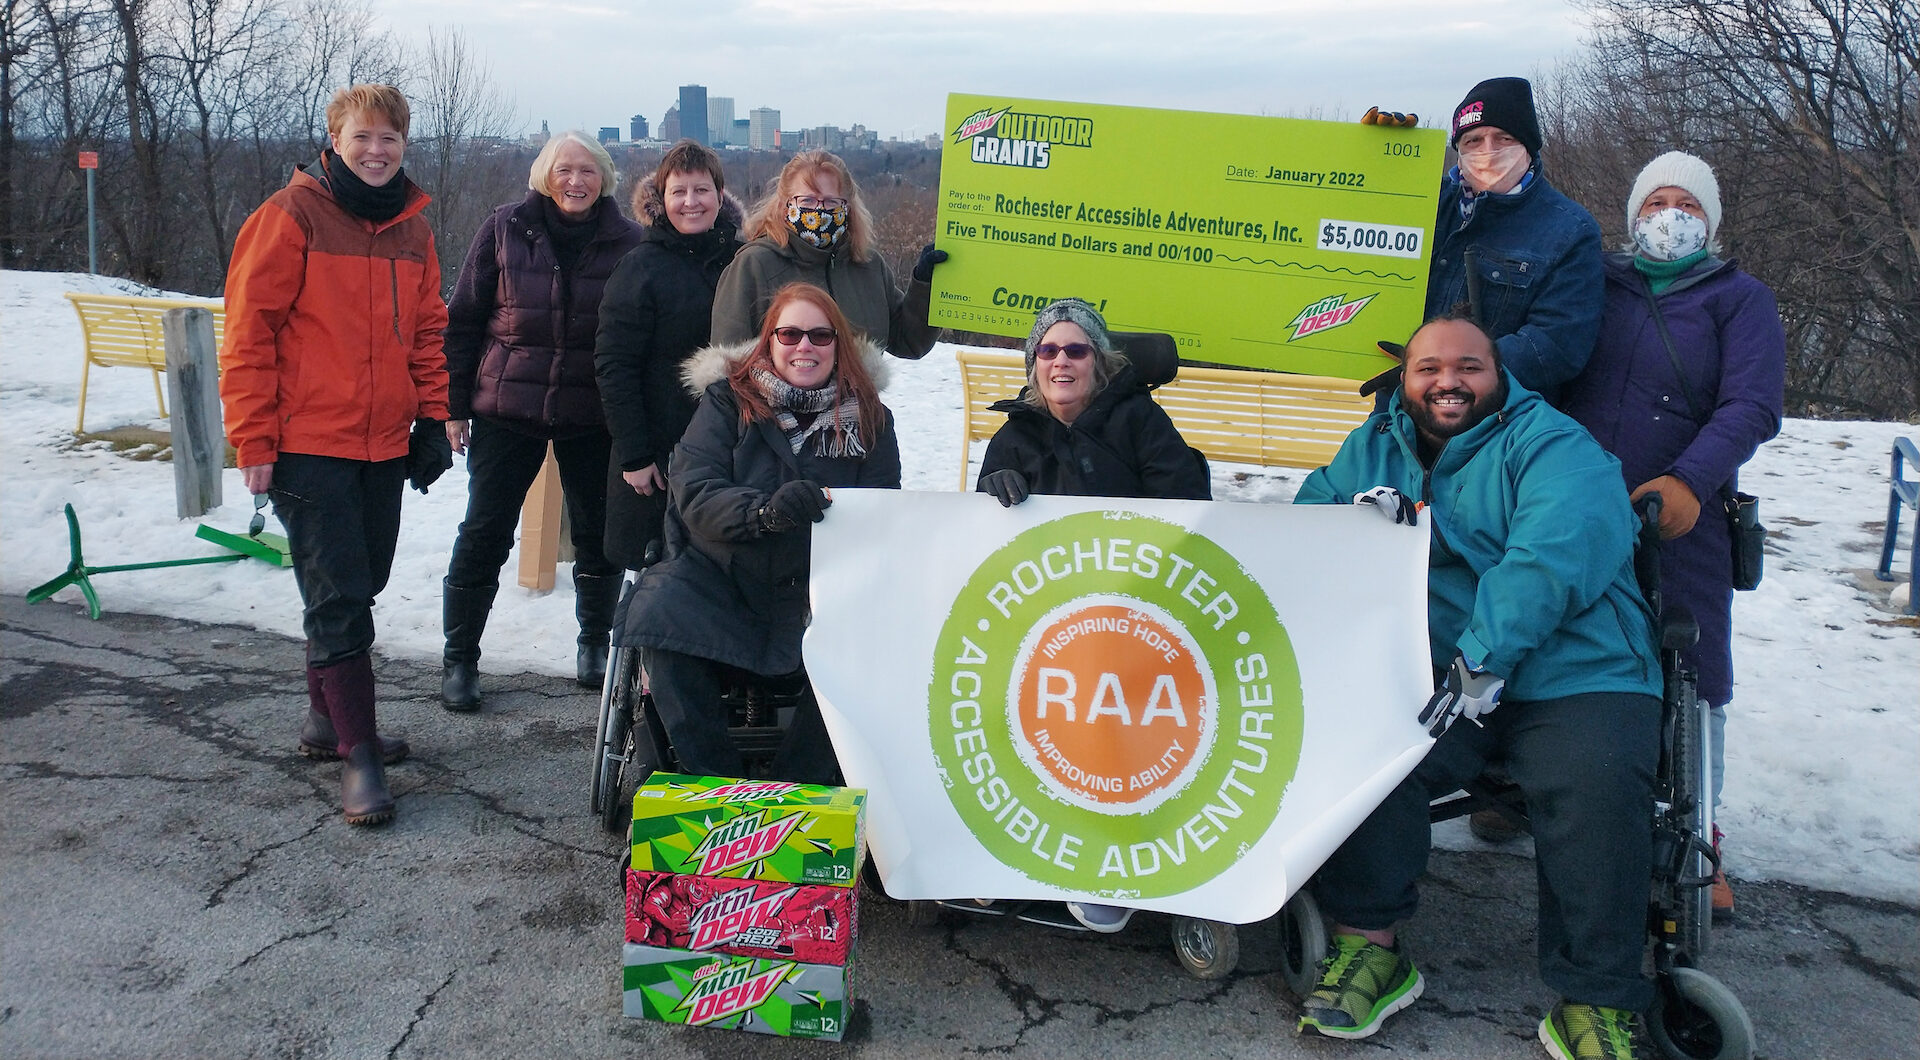 A group of people, some standing and some seated in wheelchairs, hold RAA banners and a banner from Mtn Dew Outdoor Grants. Snow is on the ground and Rochester's city skyline is behind them.